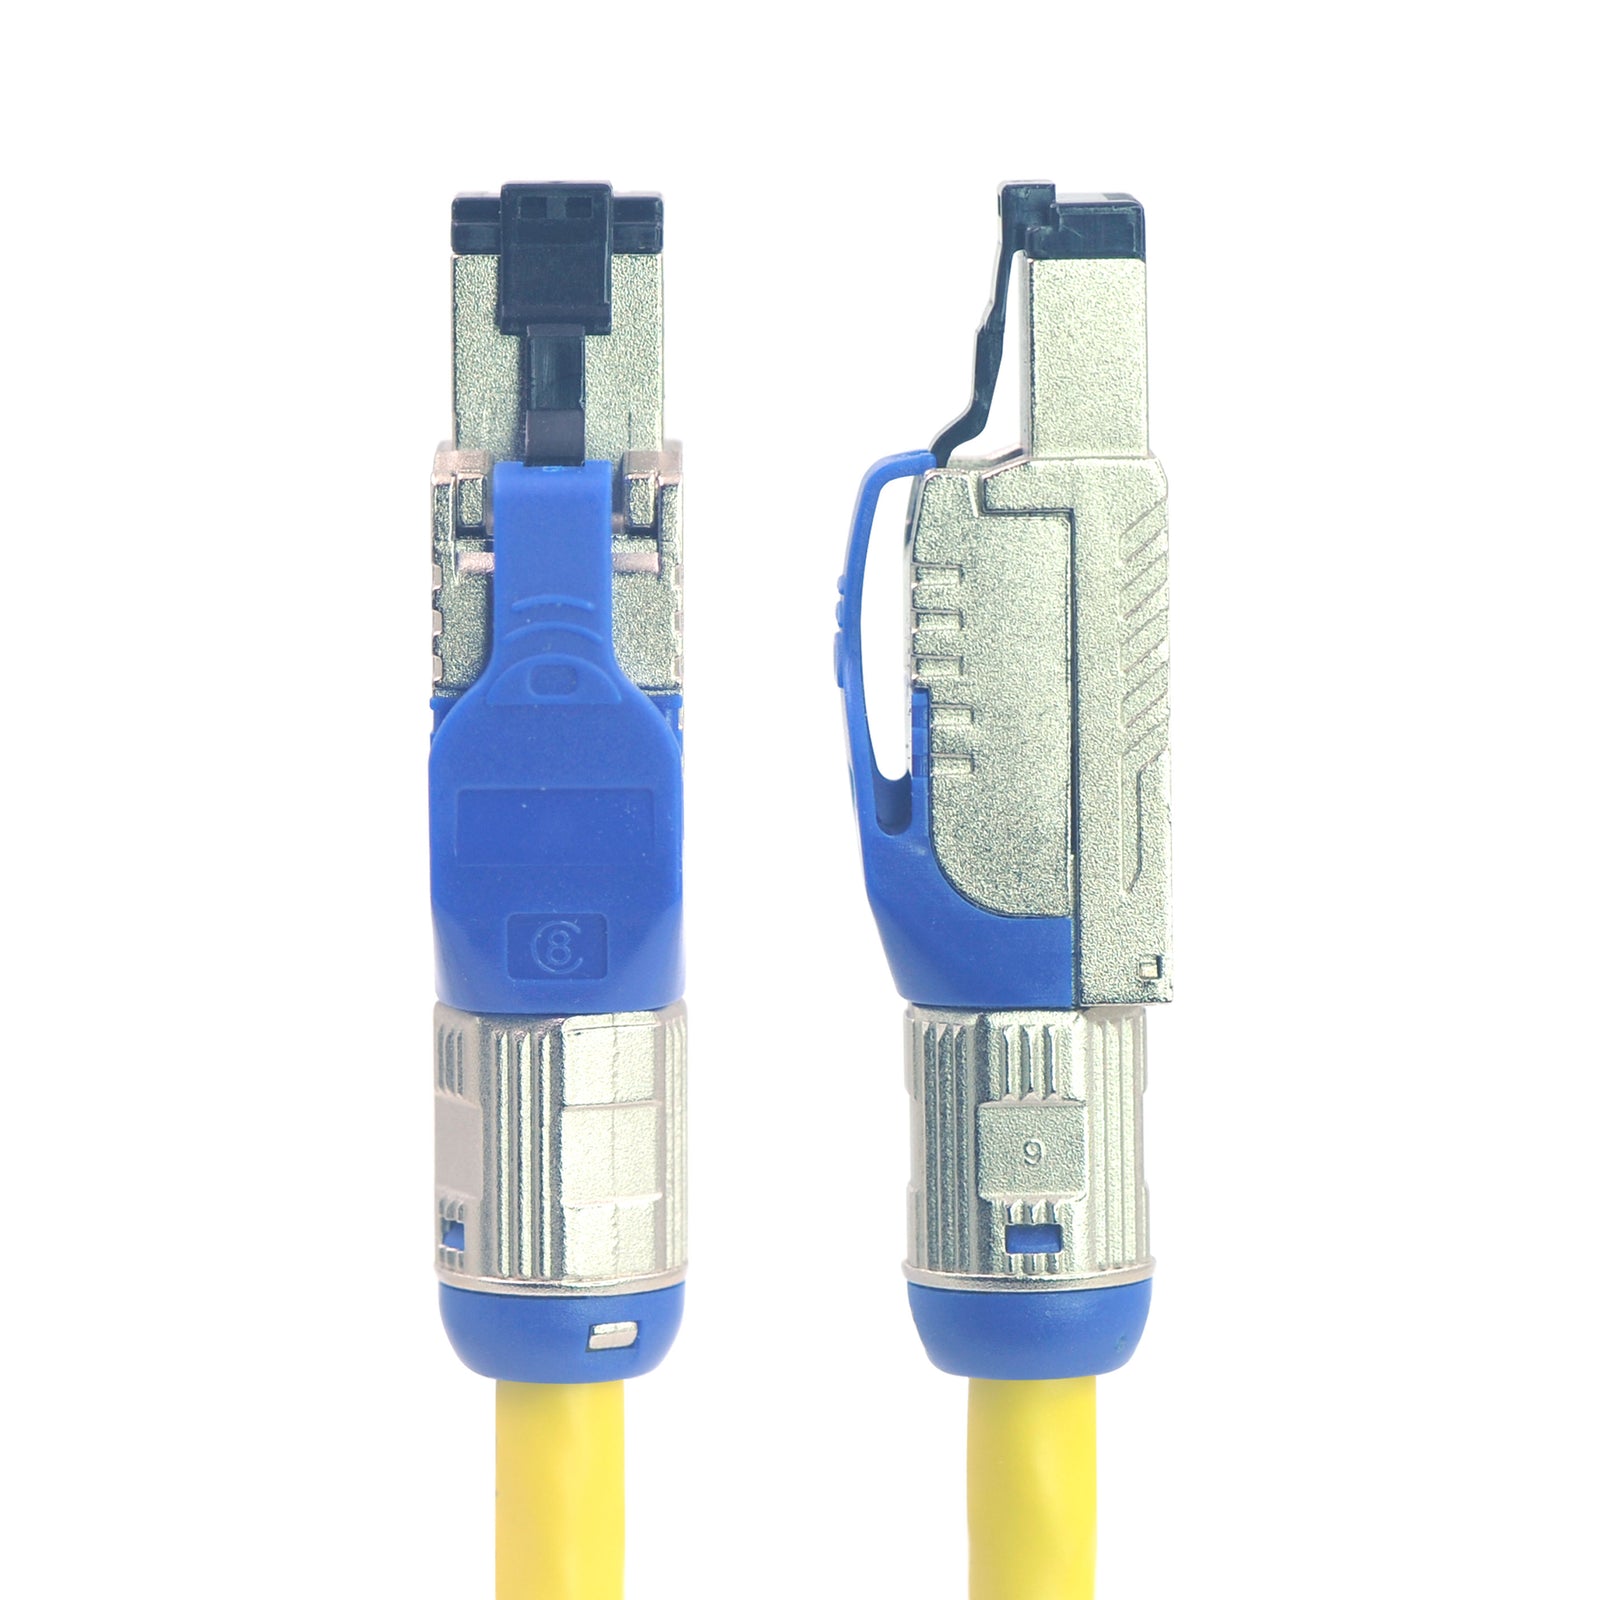 Pre-wired Cat8 Ethernet Cable VCELINK